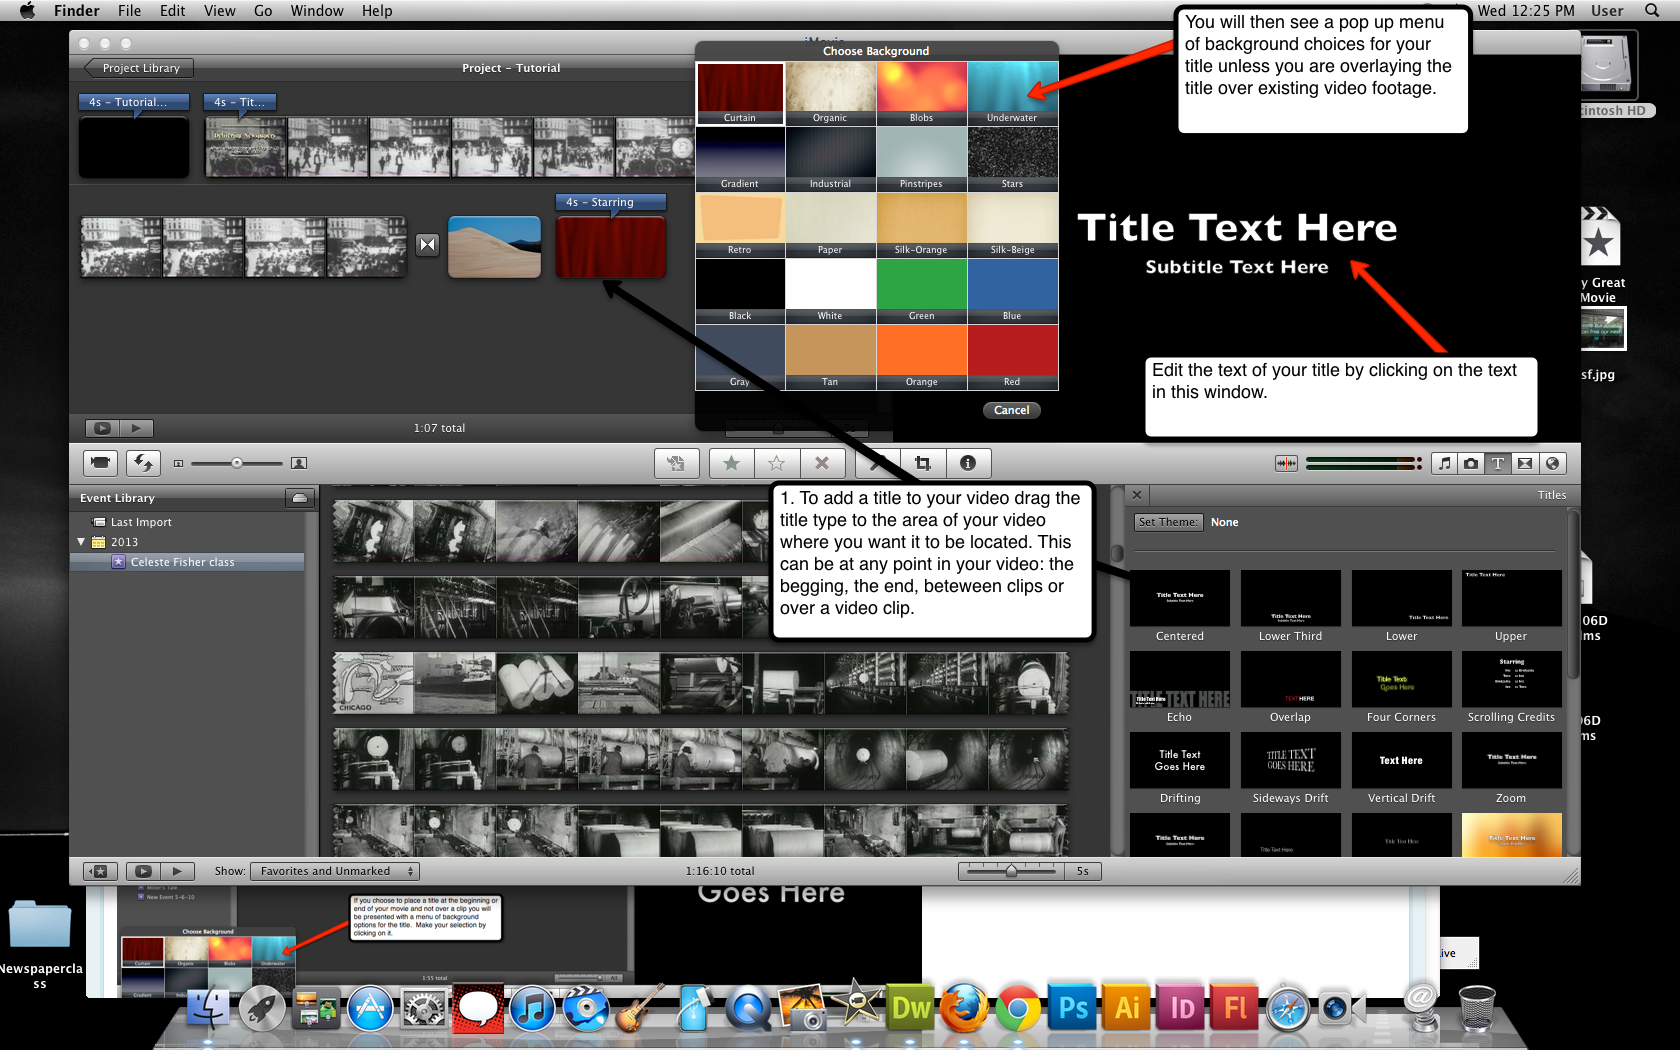 Visual guide to adding titles in iMovie '11